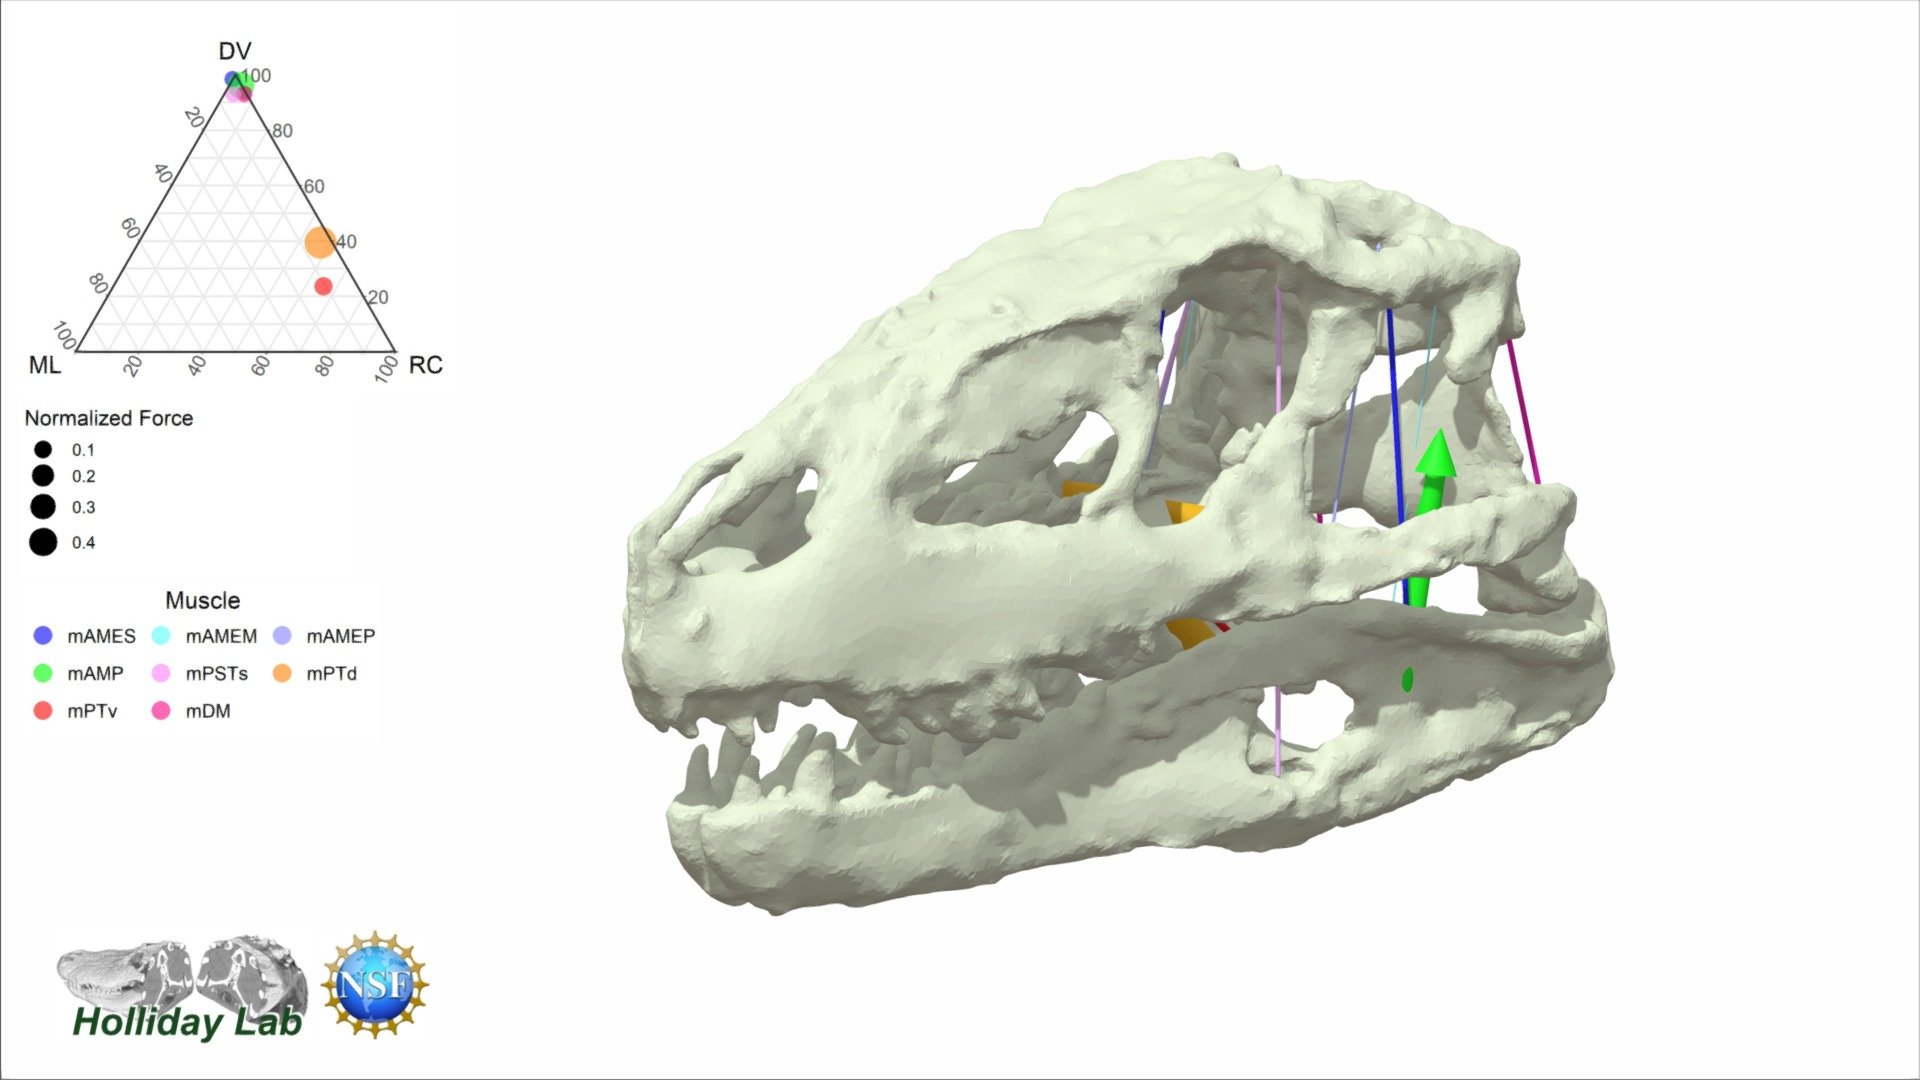 This 3D model of the terrestrial, predatory crocodylomorph Prestosuchus chiniquensis (UFRGS PV0629T) from the Triassic Santa Maria Formation in Rio Grande du Sul, Brazil shows the primitive condition of temporal muscles being largely vertically oriented as well as relatively vertically oriented pterygoideus muscles compared to later crocodylomorph species. Read more on how the evolution of skull shape in crocodilians affected jaw muscle function in Sellers et al (2022) in in Anatomical Record: https://doi.org/10.1002/ar.24912. The original descriptions of this awesome fossil can be found here: doi:10.4202/app.00527.2018 with thanks to Cesar Shultz (UFRGS) for sharing the data. Thanks to National Science Foundation 1631684 for supporting the work 3d model